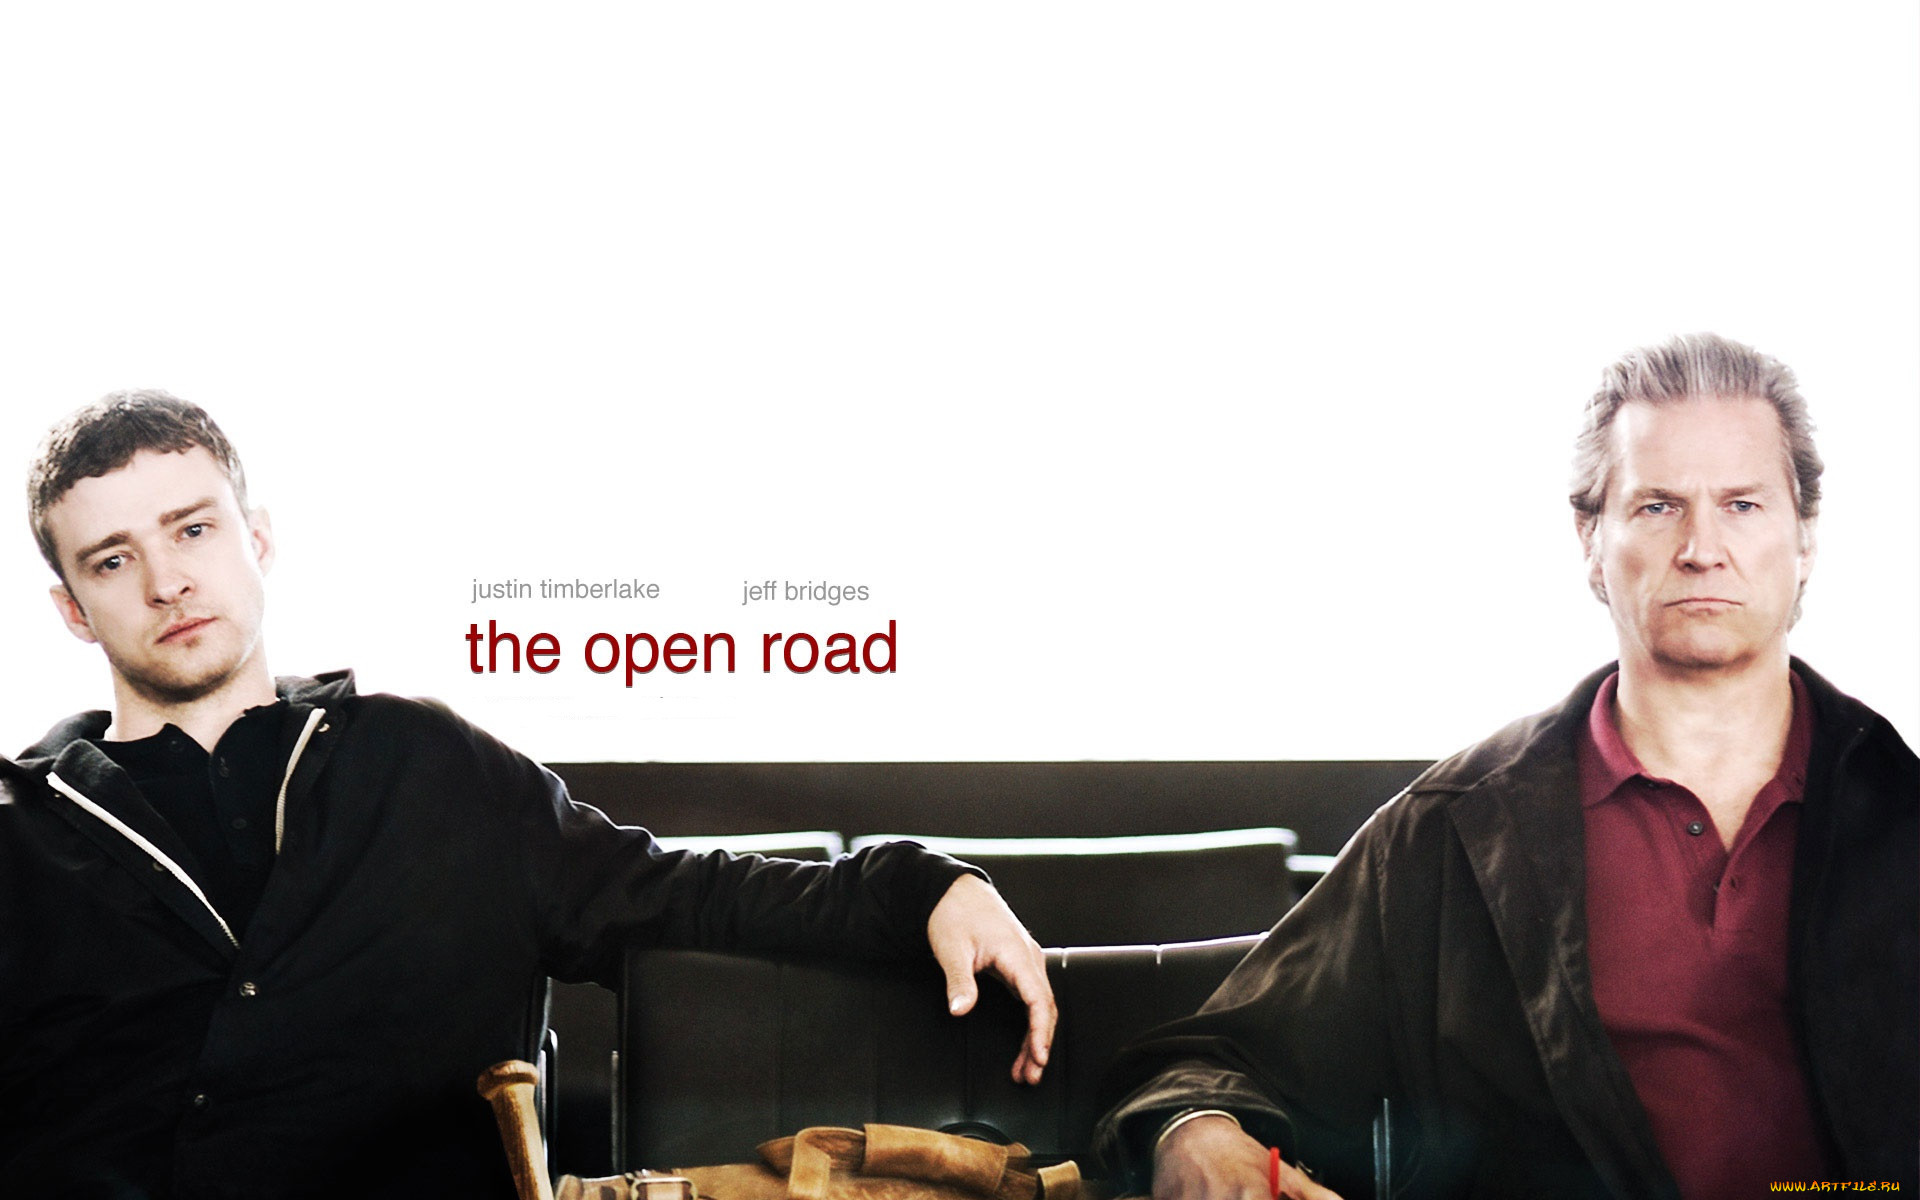  , the open road, , , 